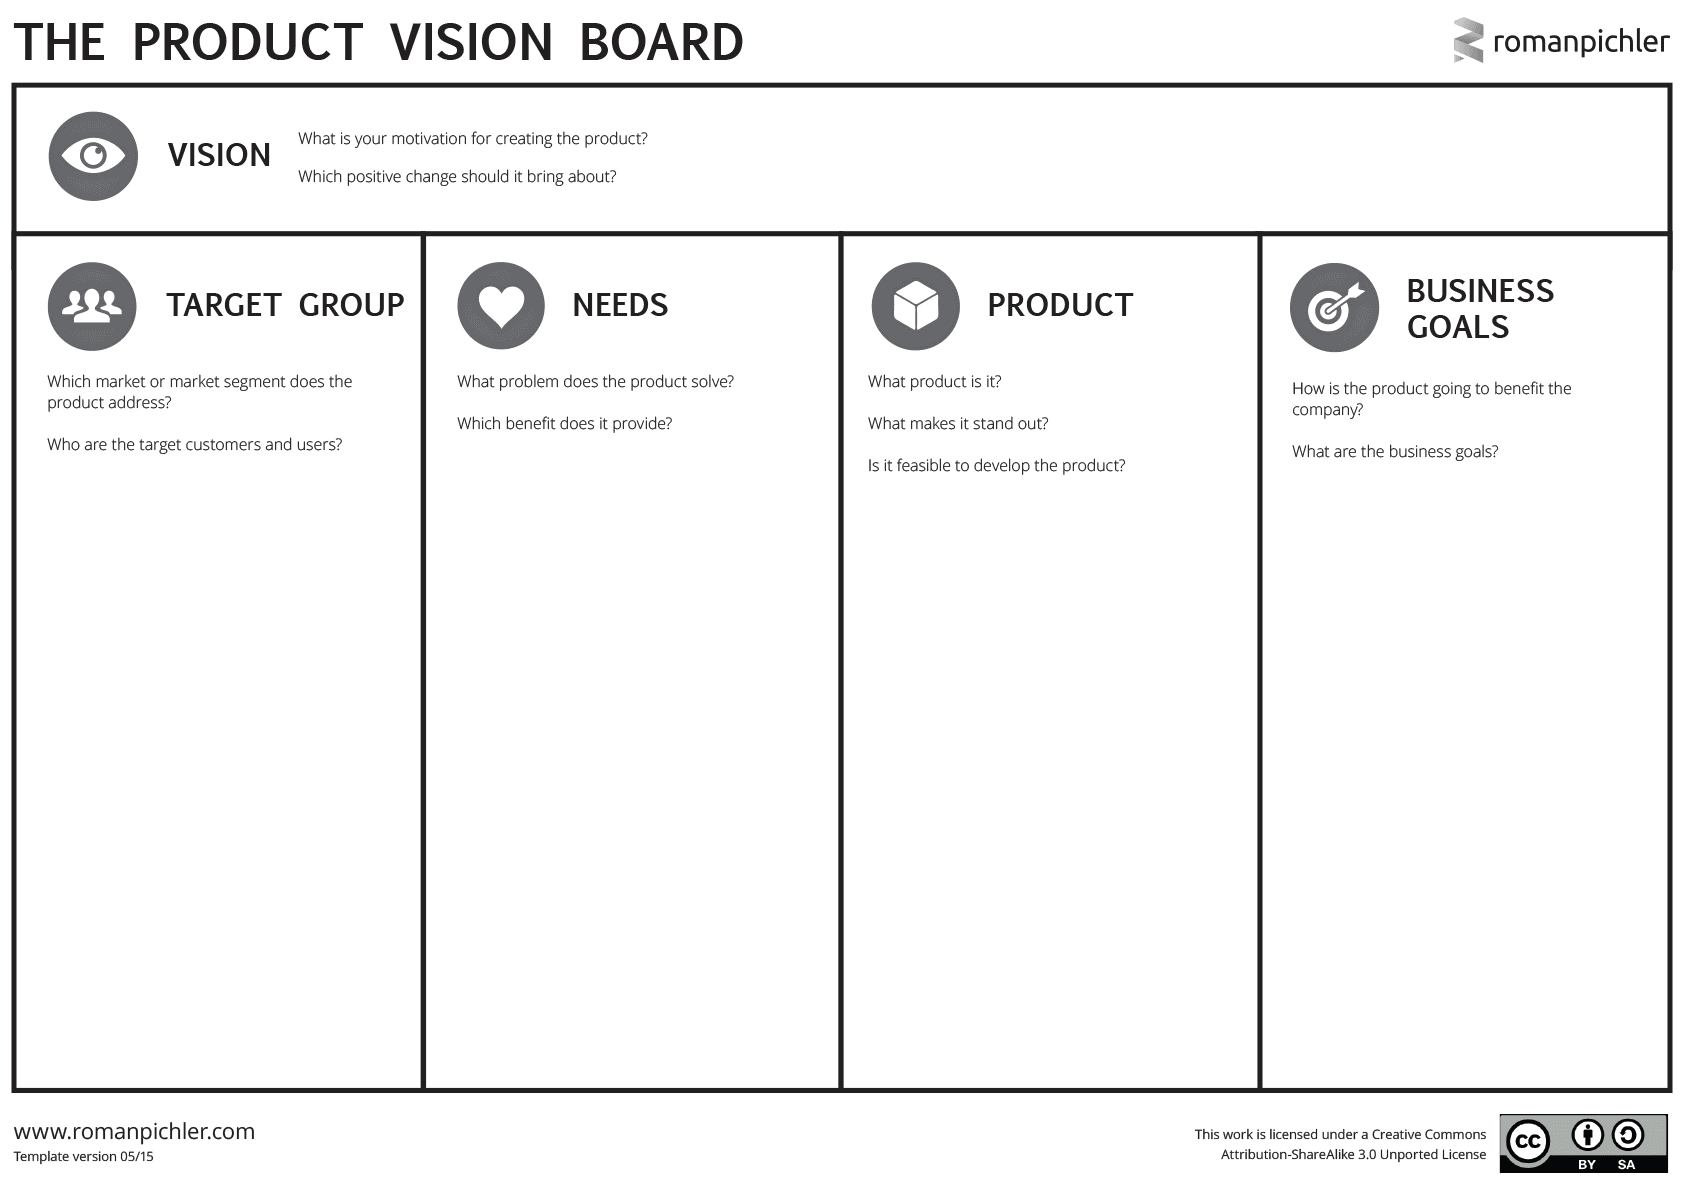 Product Vision Board Template by Roman Pichler